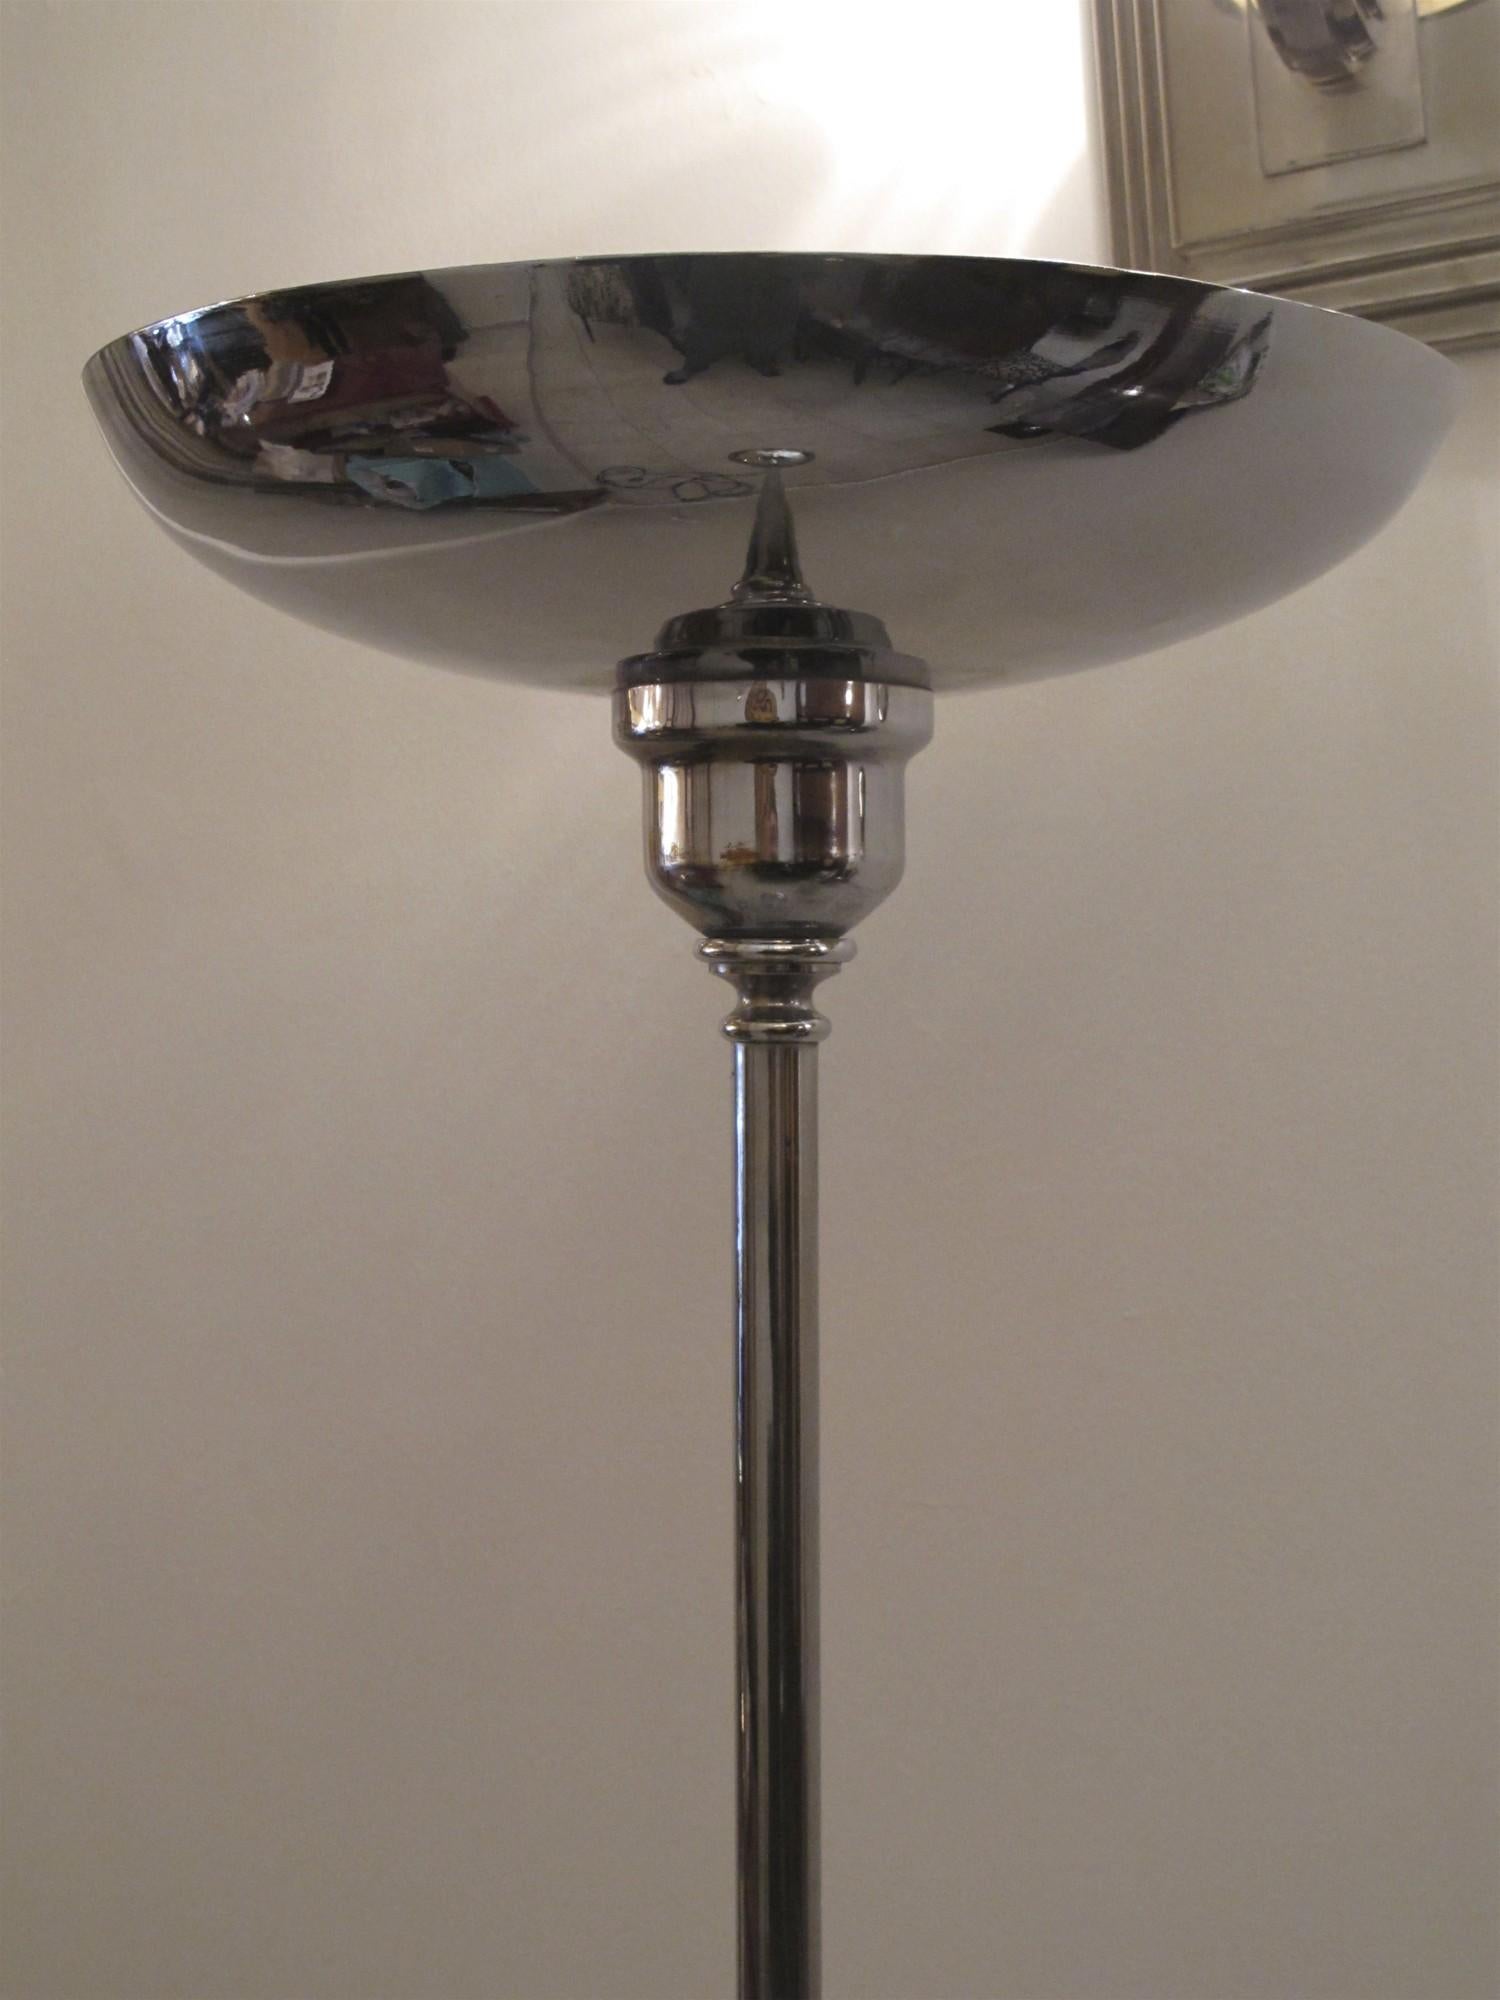 Floor lamp Art Deco

Materials: chrome
France
1930
You want to live in the golden years, those are the floor lamps that your project needs.
We have specialized in the sale of Art Deco and Art Nouveau styles since 1982.
Pushing the button that reads